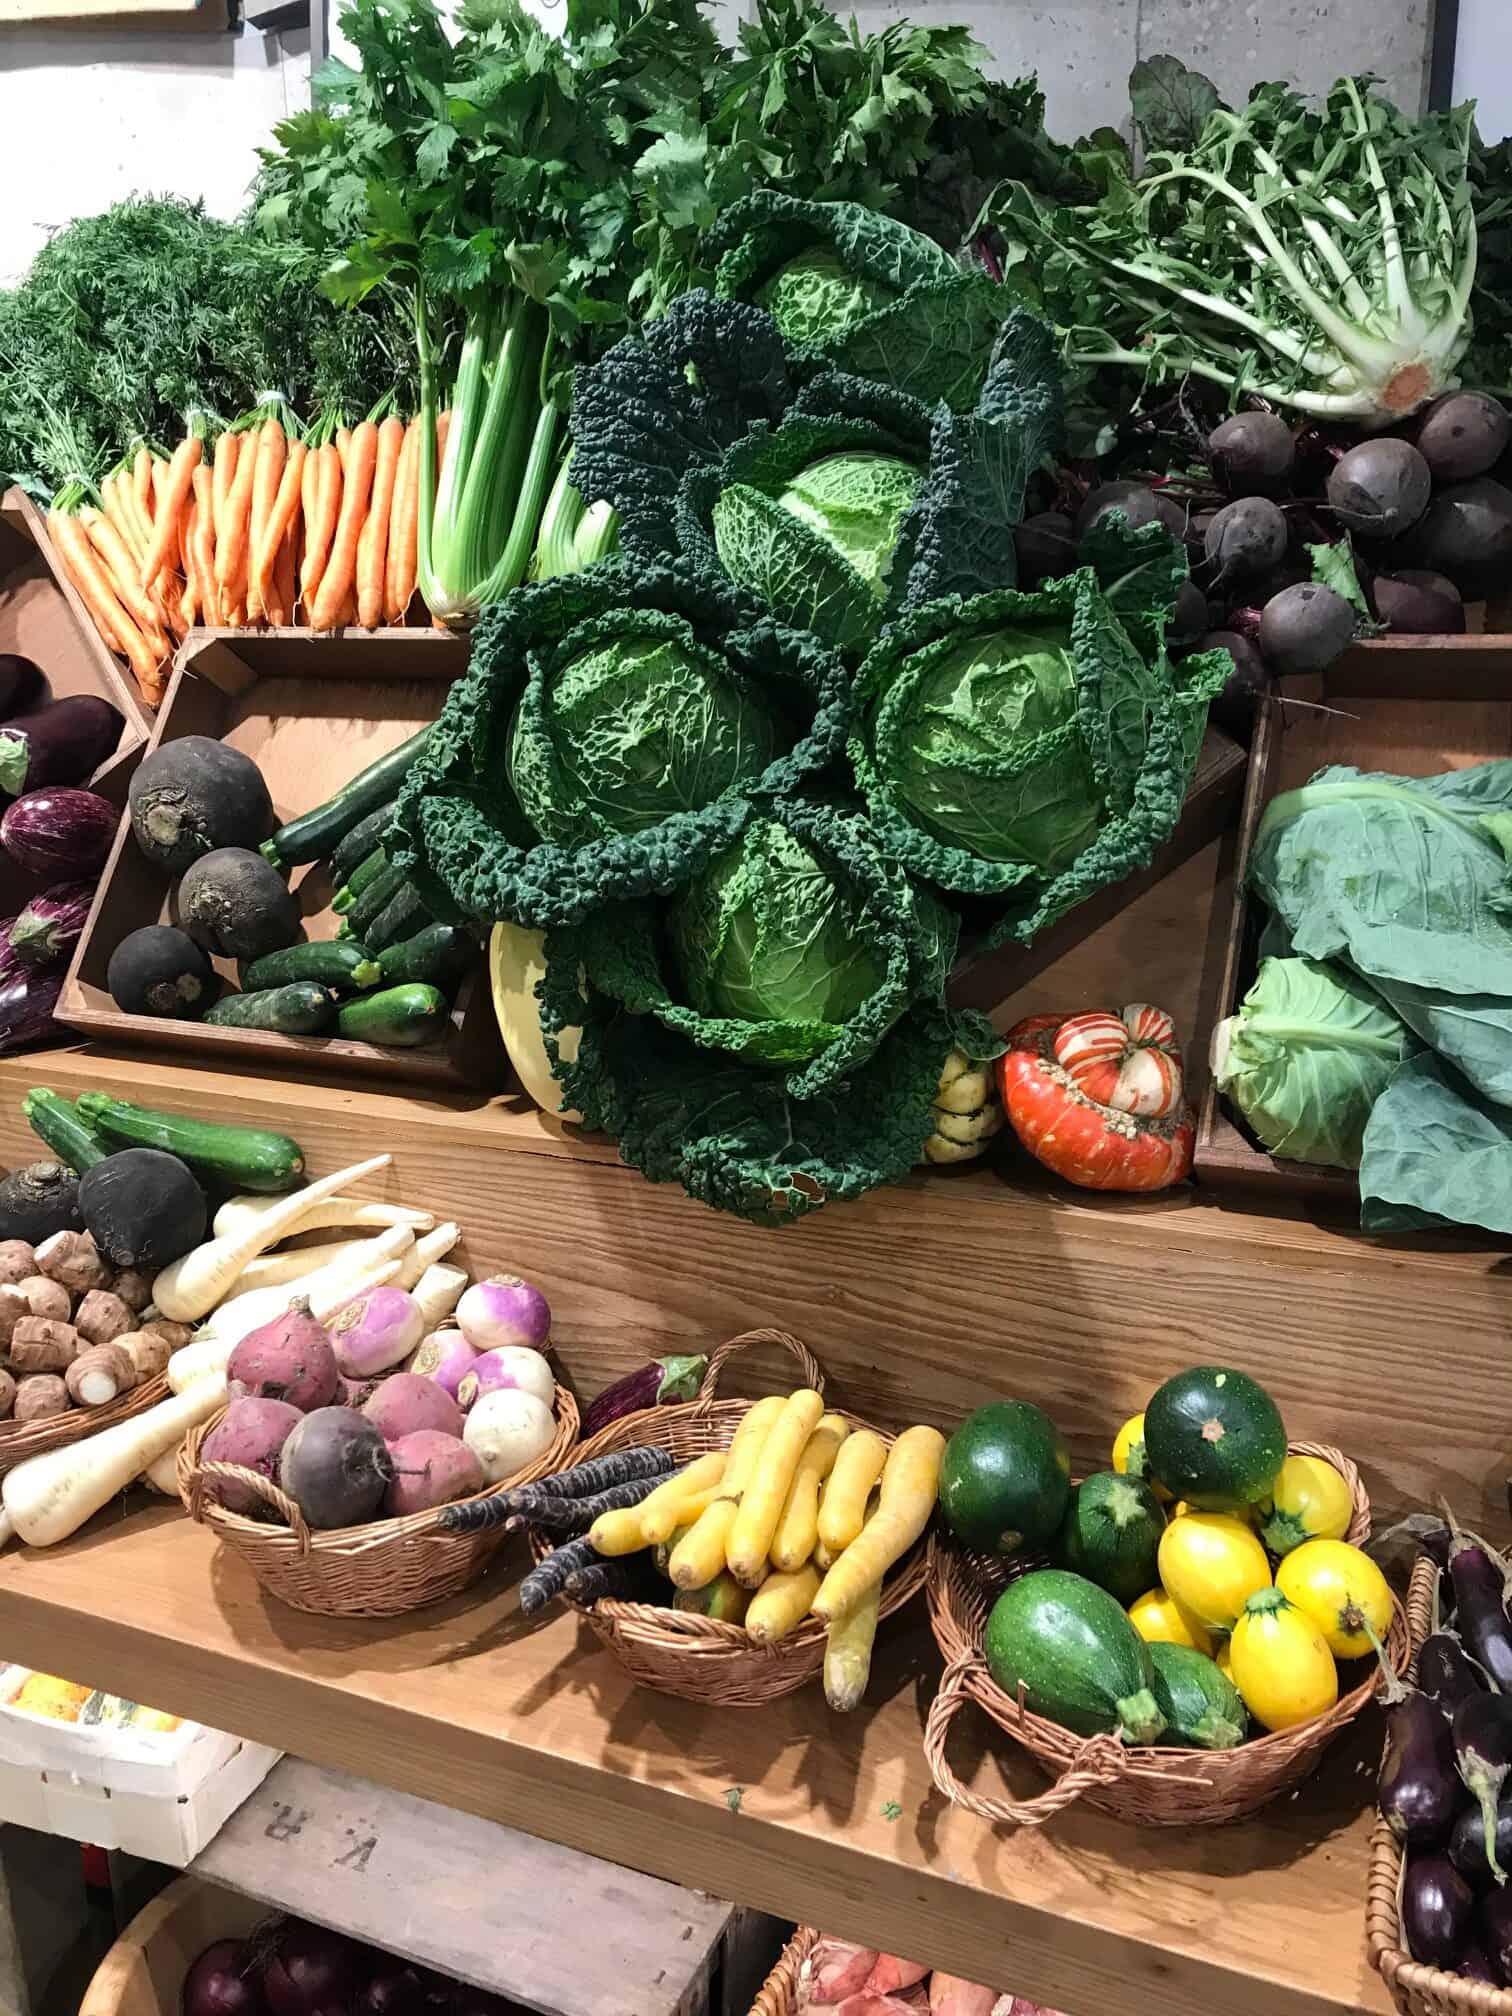 Fresh produce on display on shelves in a shop.